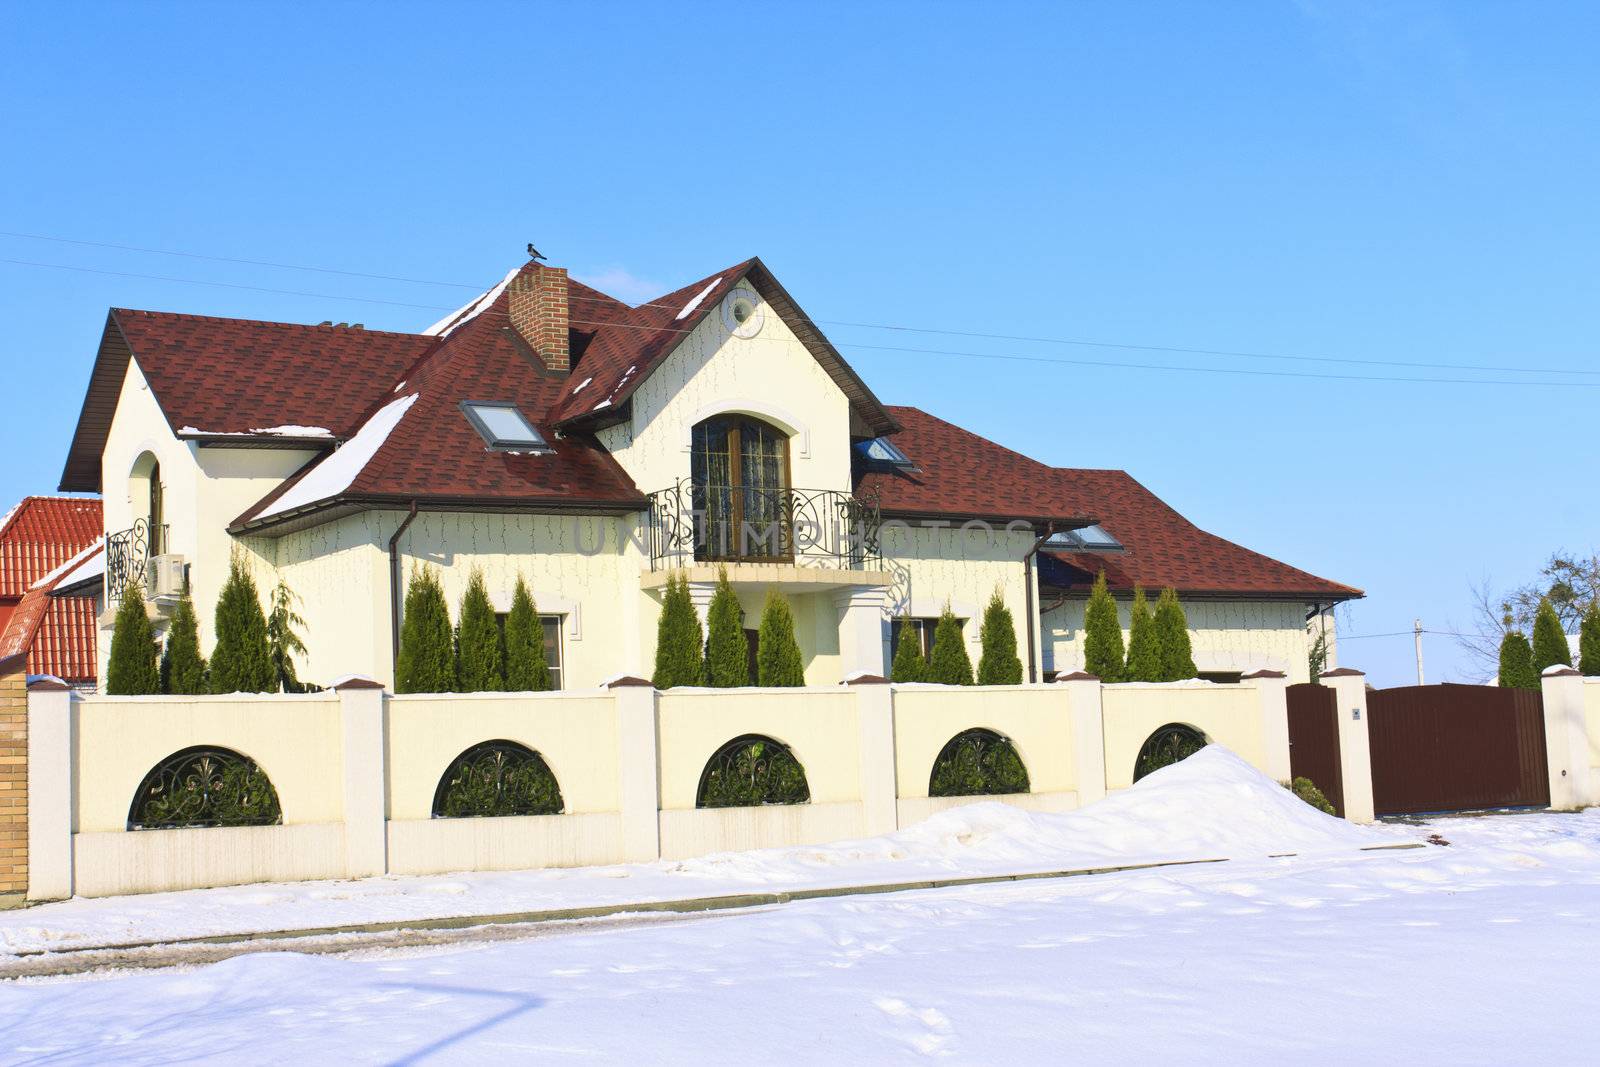 The typical town house in the winter on a background of blue sky